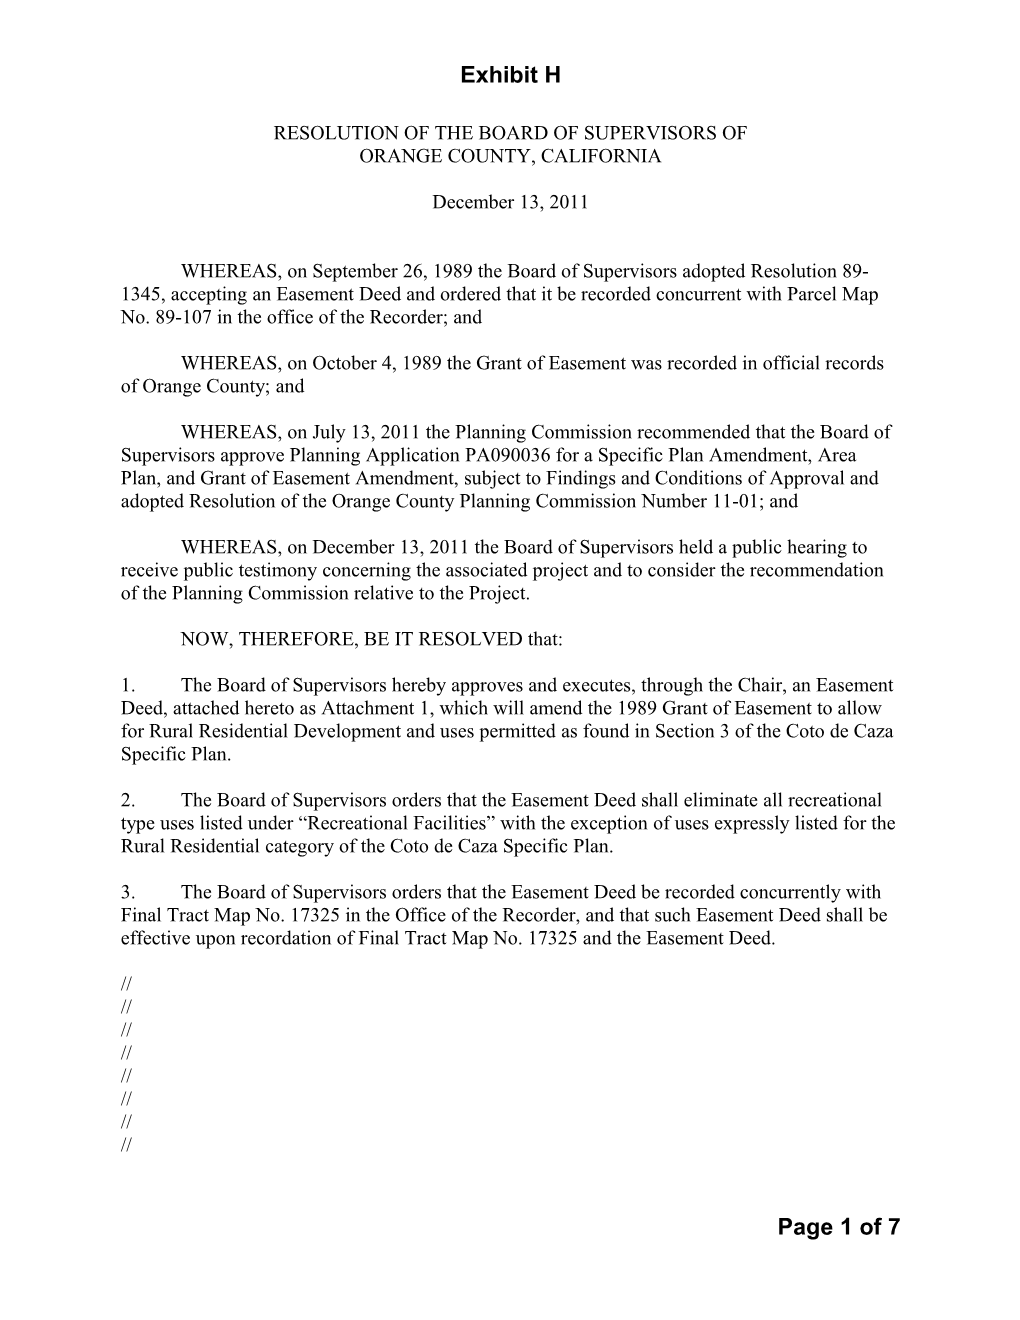 Resolution of the Board of Supervisors Of s1